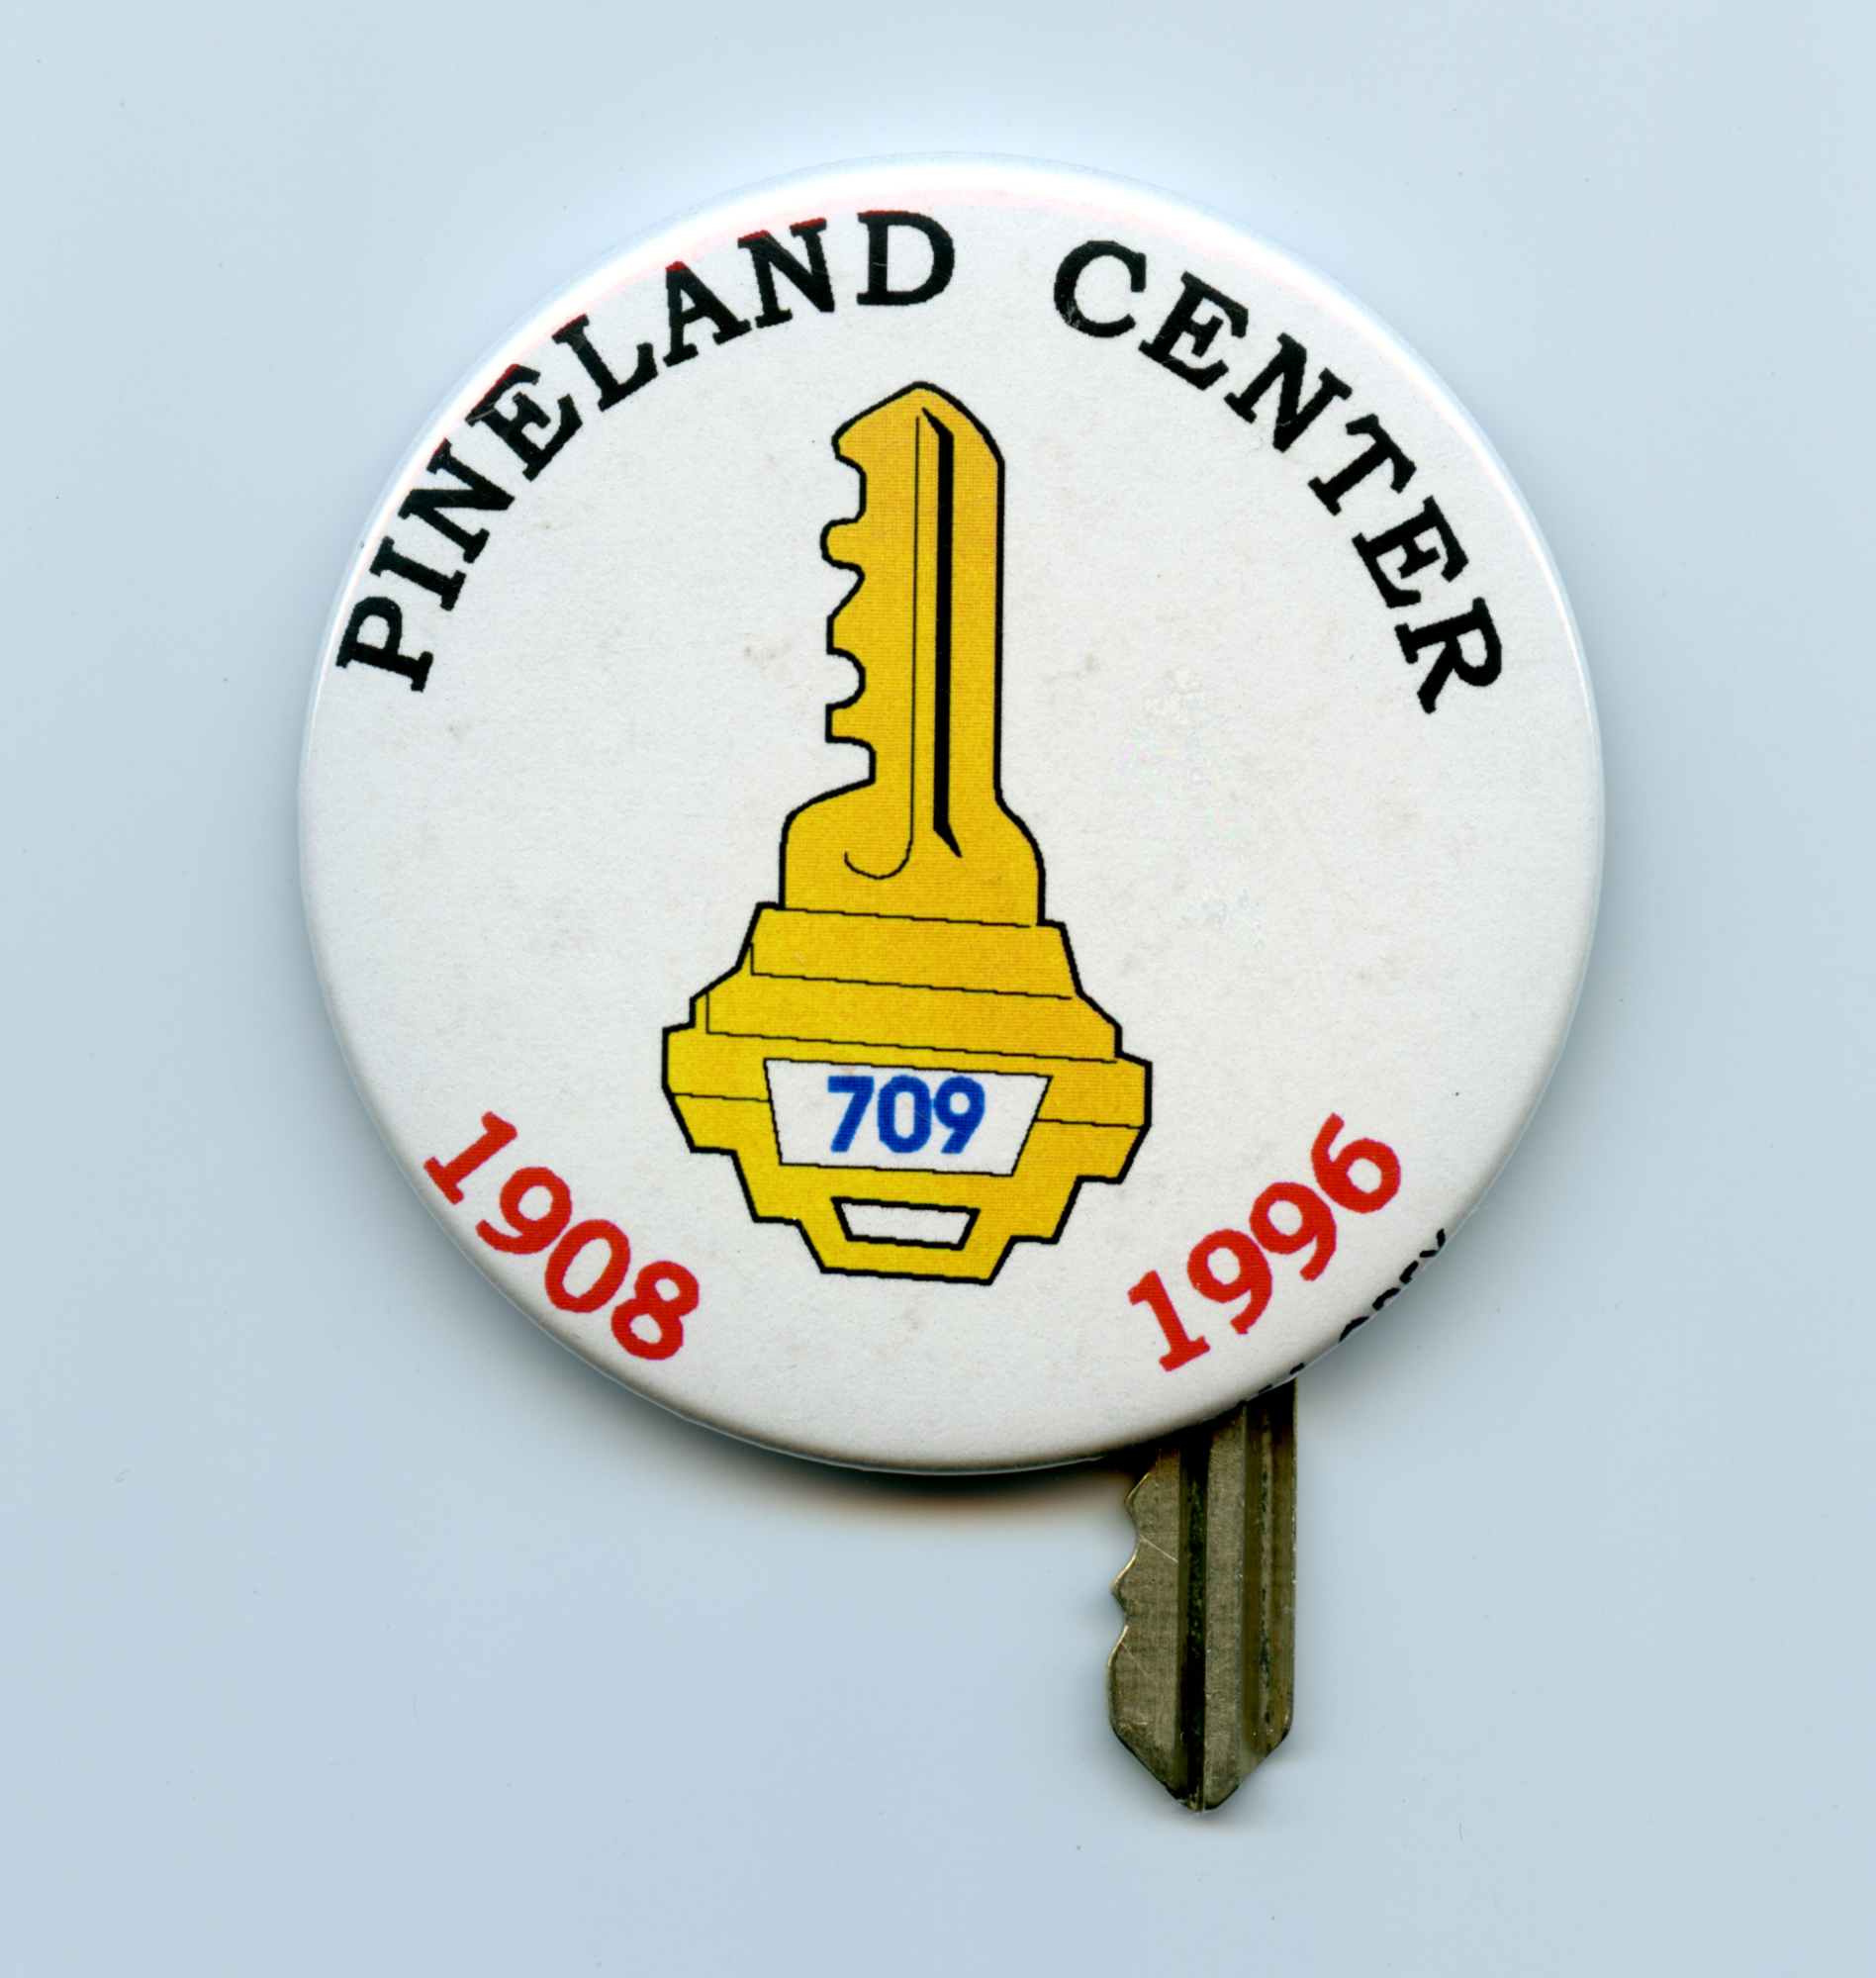 A photo of a round pinback slogan button, with the words “PINELAND CENTER” around the top edge in black, the dates “1908” and “1996” around the bottom edge in red, and a drawing of a yellow key with the number “709” on it. Peeking out from under the button is the bottom of a house key.